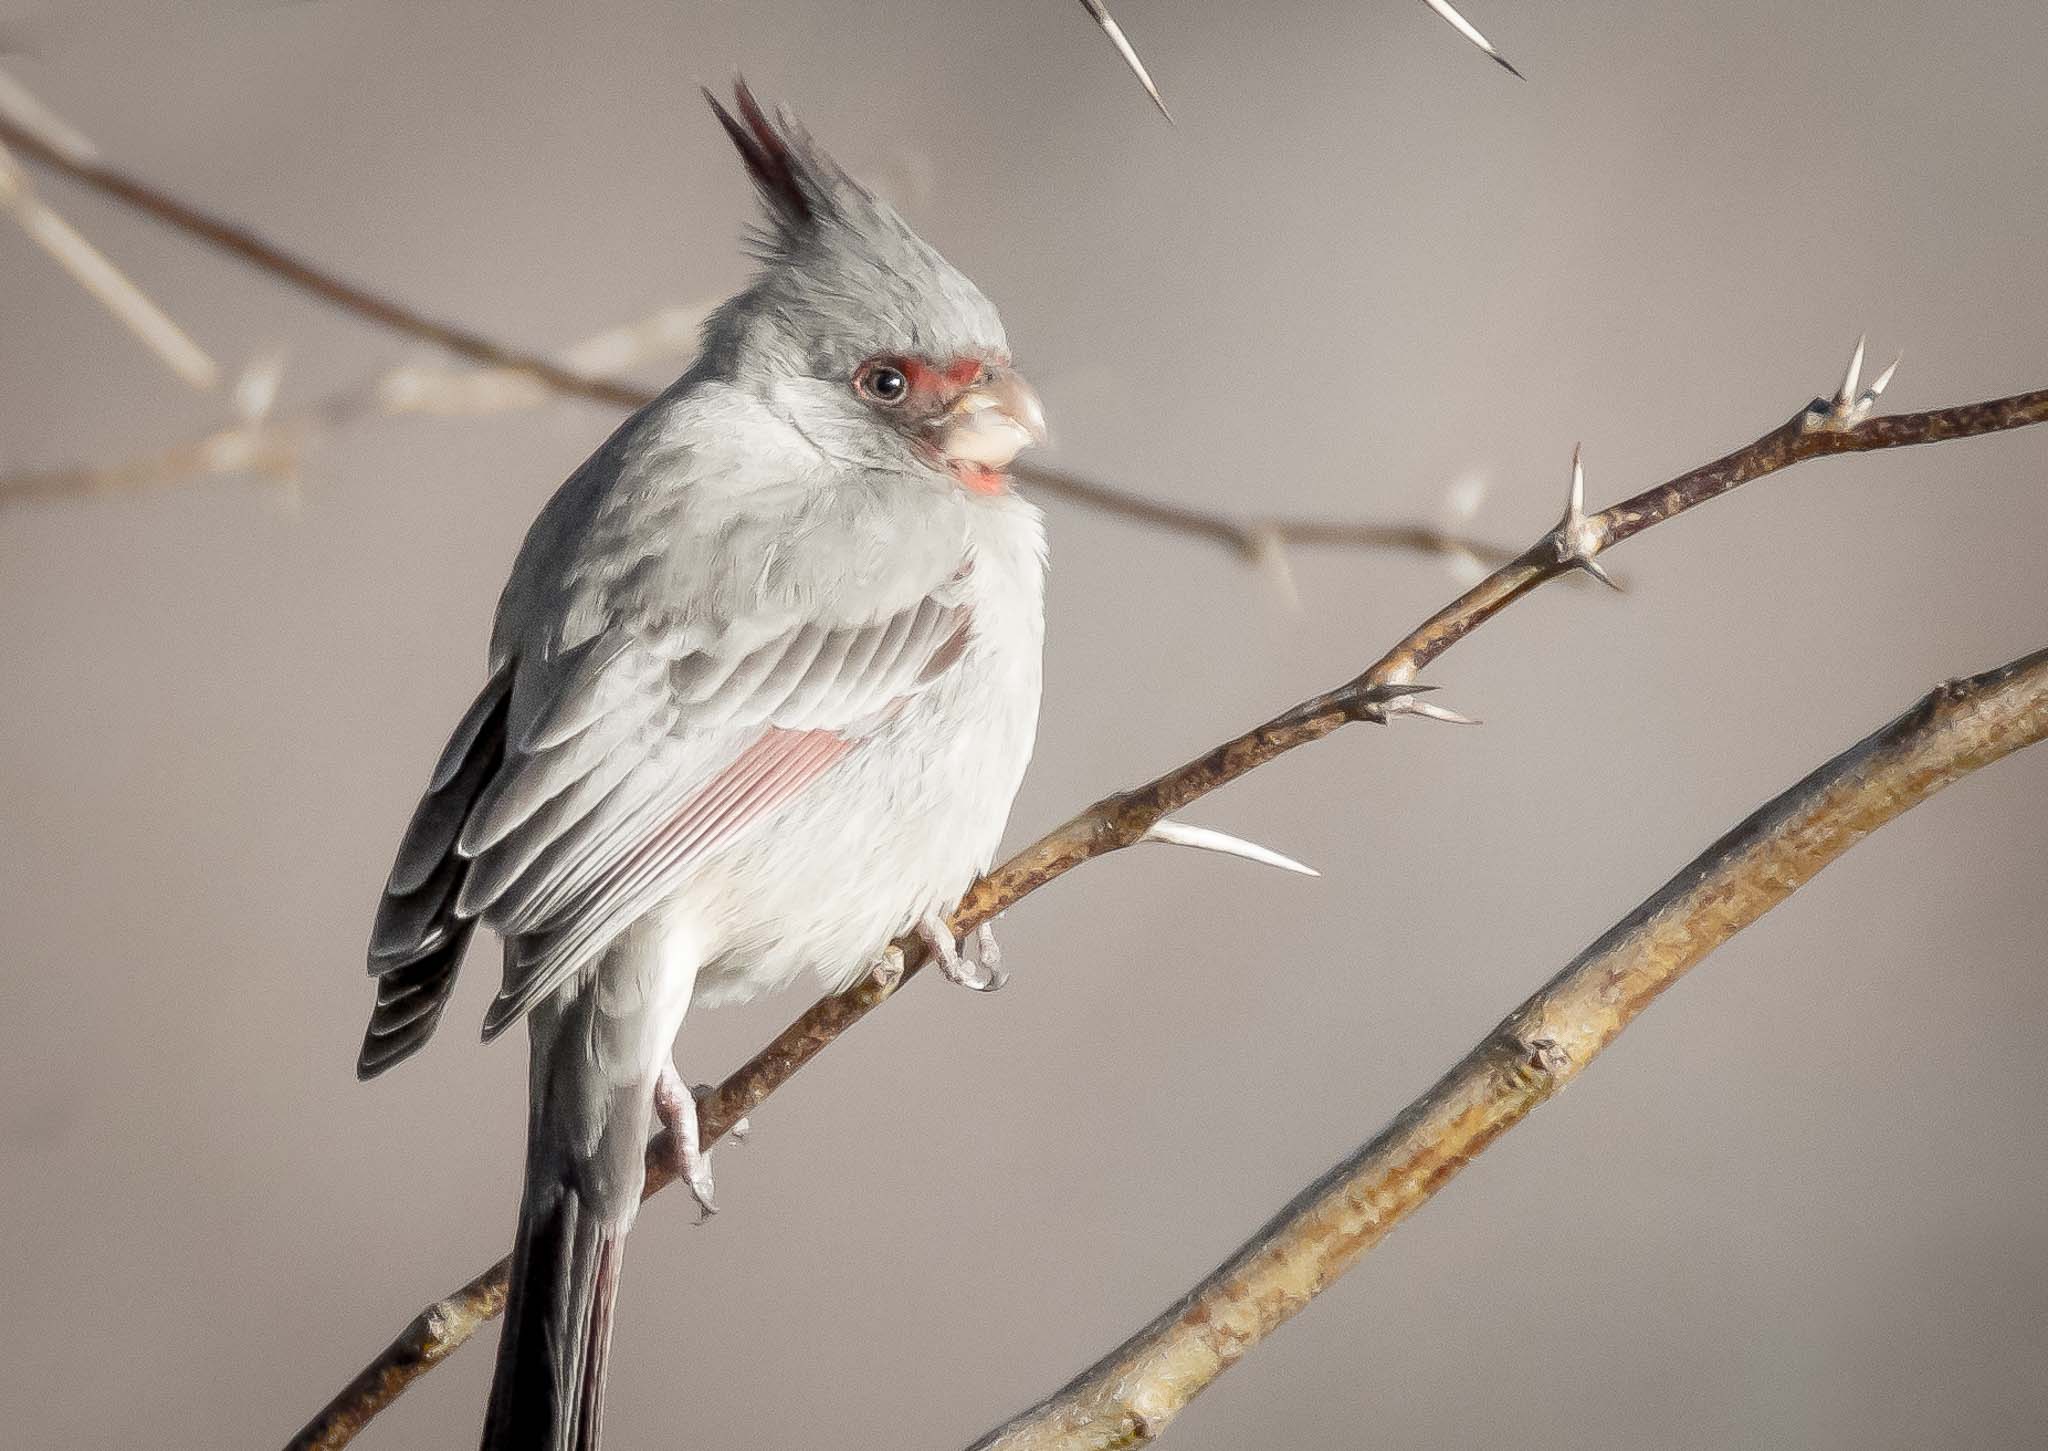 Pyrrhuloxia on a branch, Paseo del Rio Campground, Elephant Butte State Park, Truth or Consequences NM, February 4, 2015